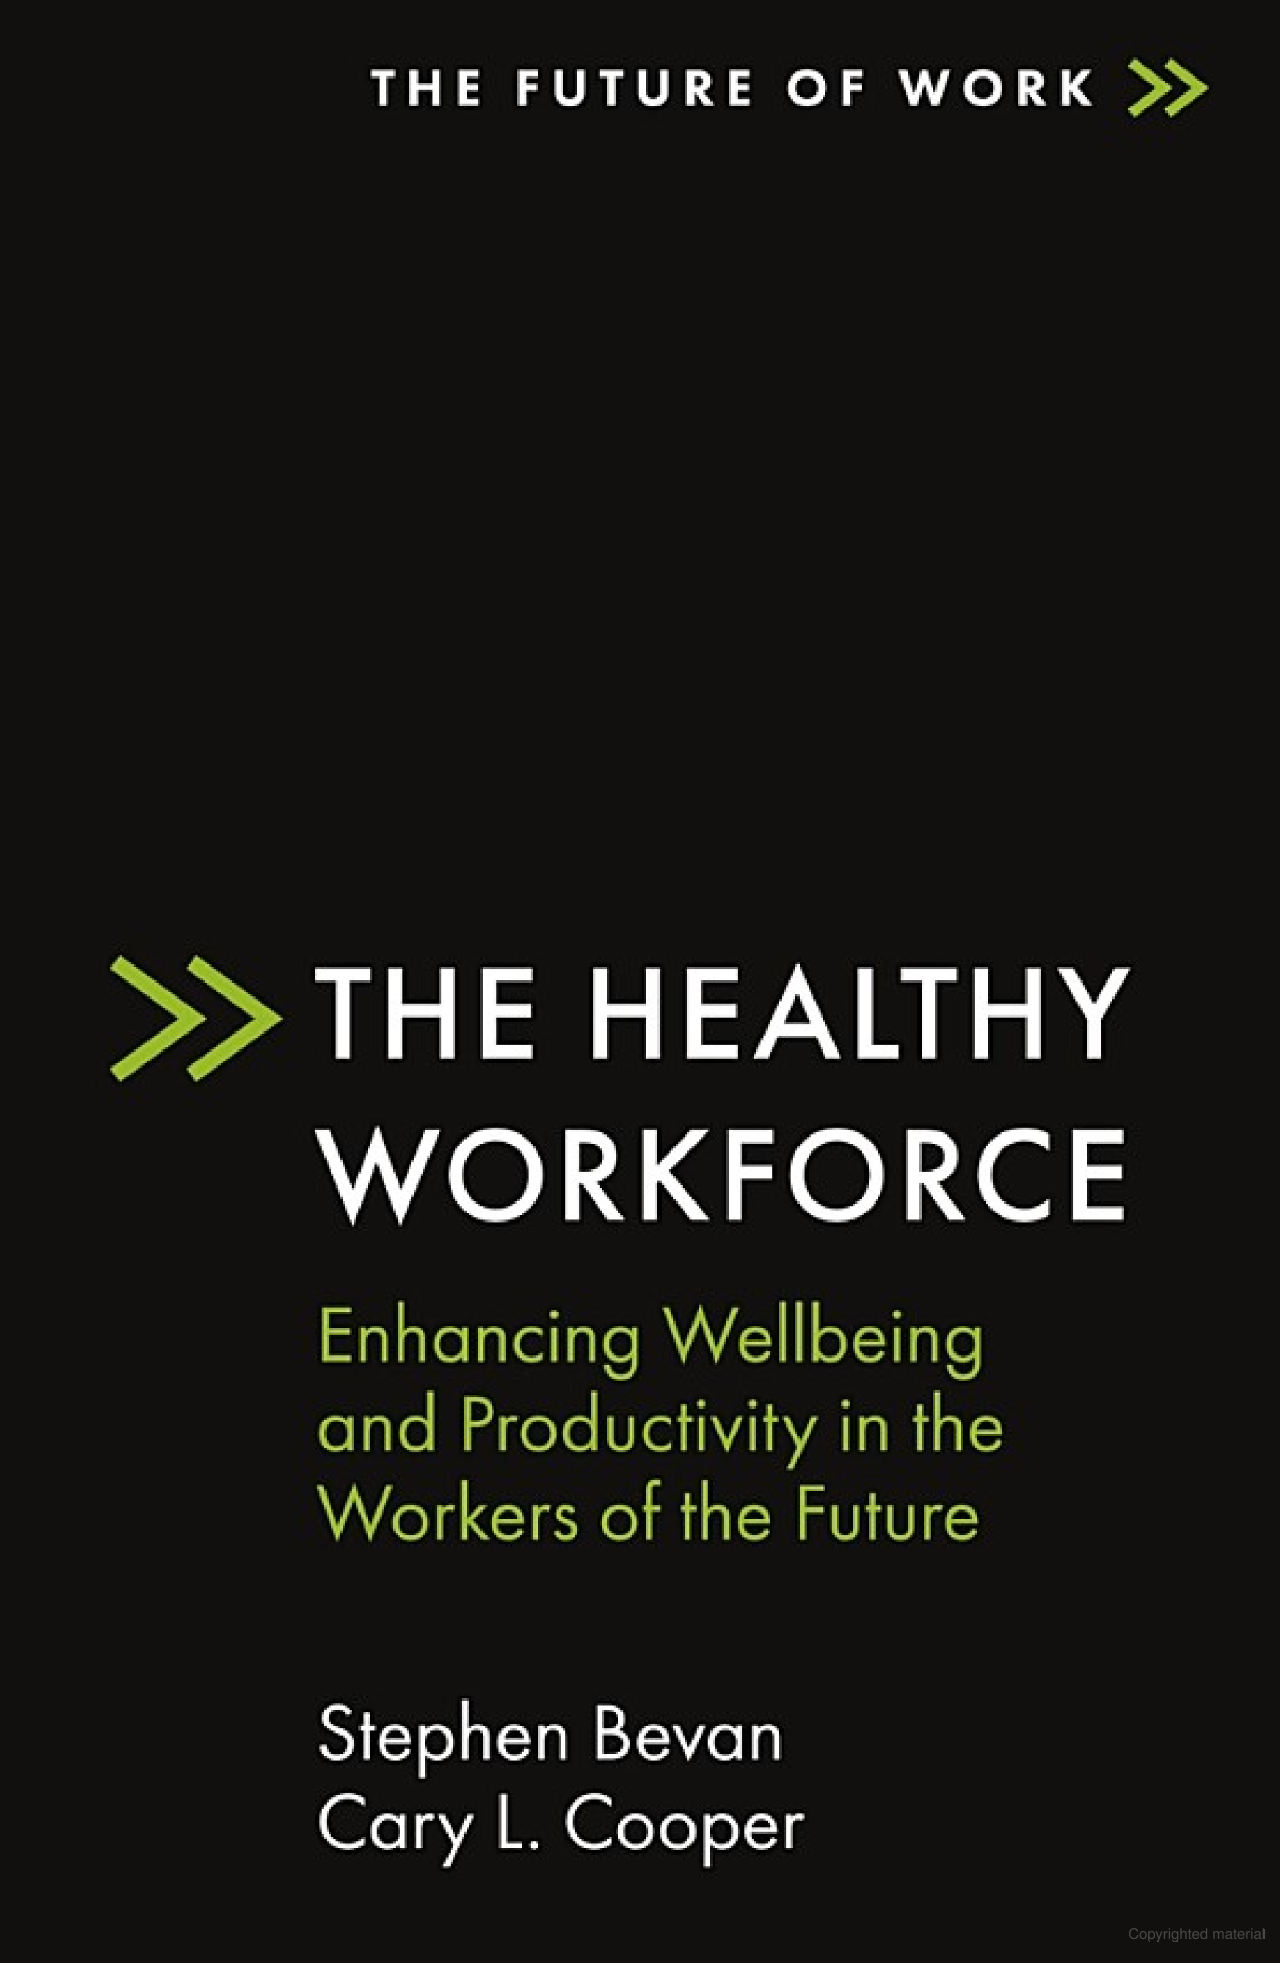 The healthy workforce enhancing wellbeing and productivity in the workers of the future